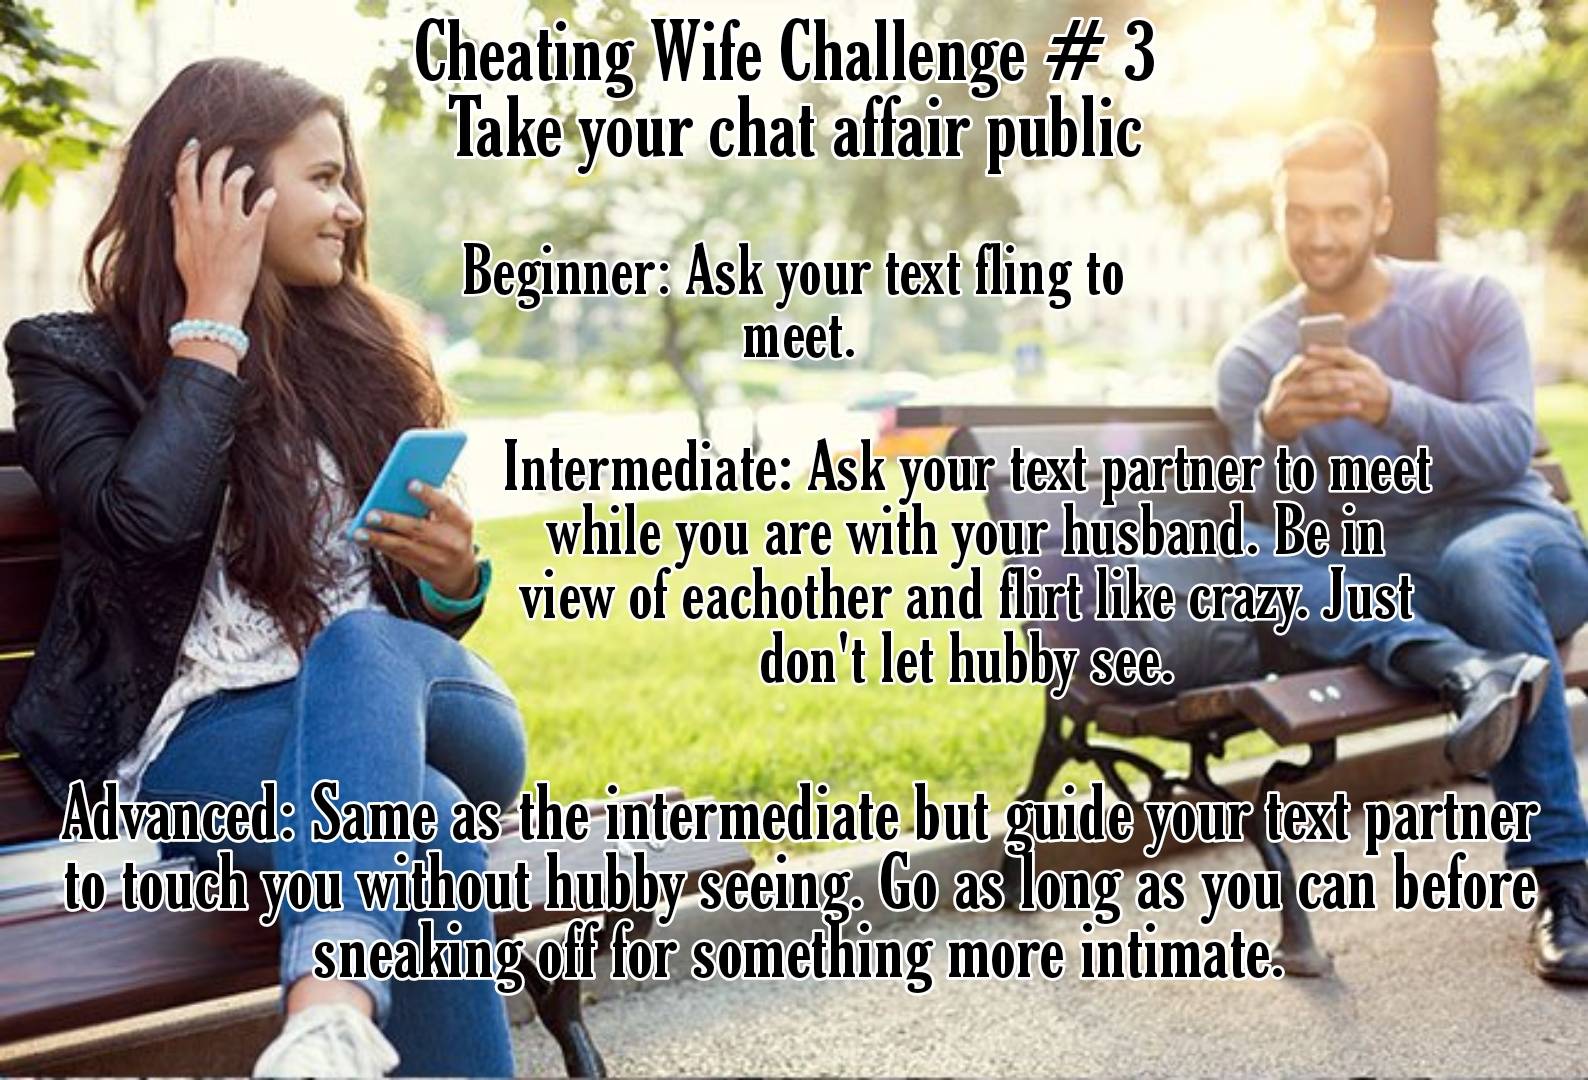 Cheating Wife Challenge 3 6nh2h8y7oo 1588x1080 